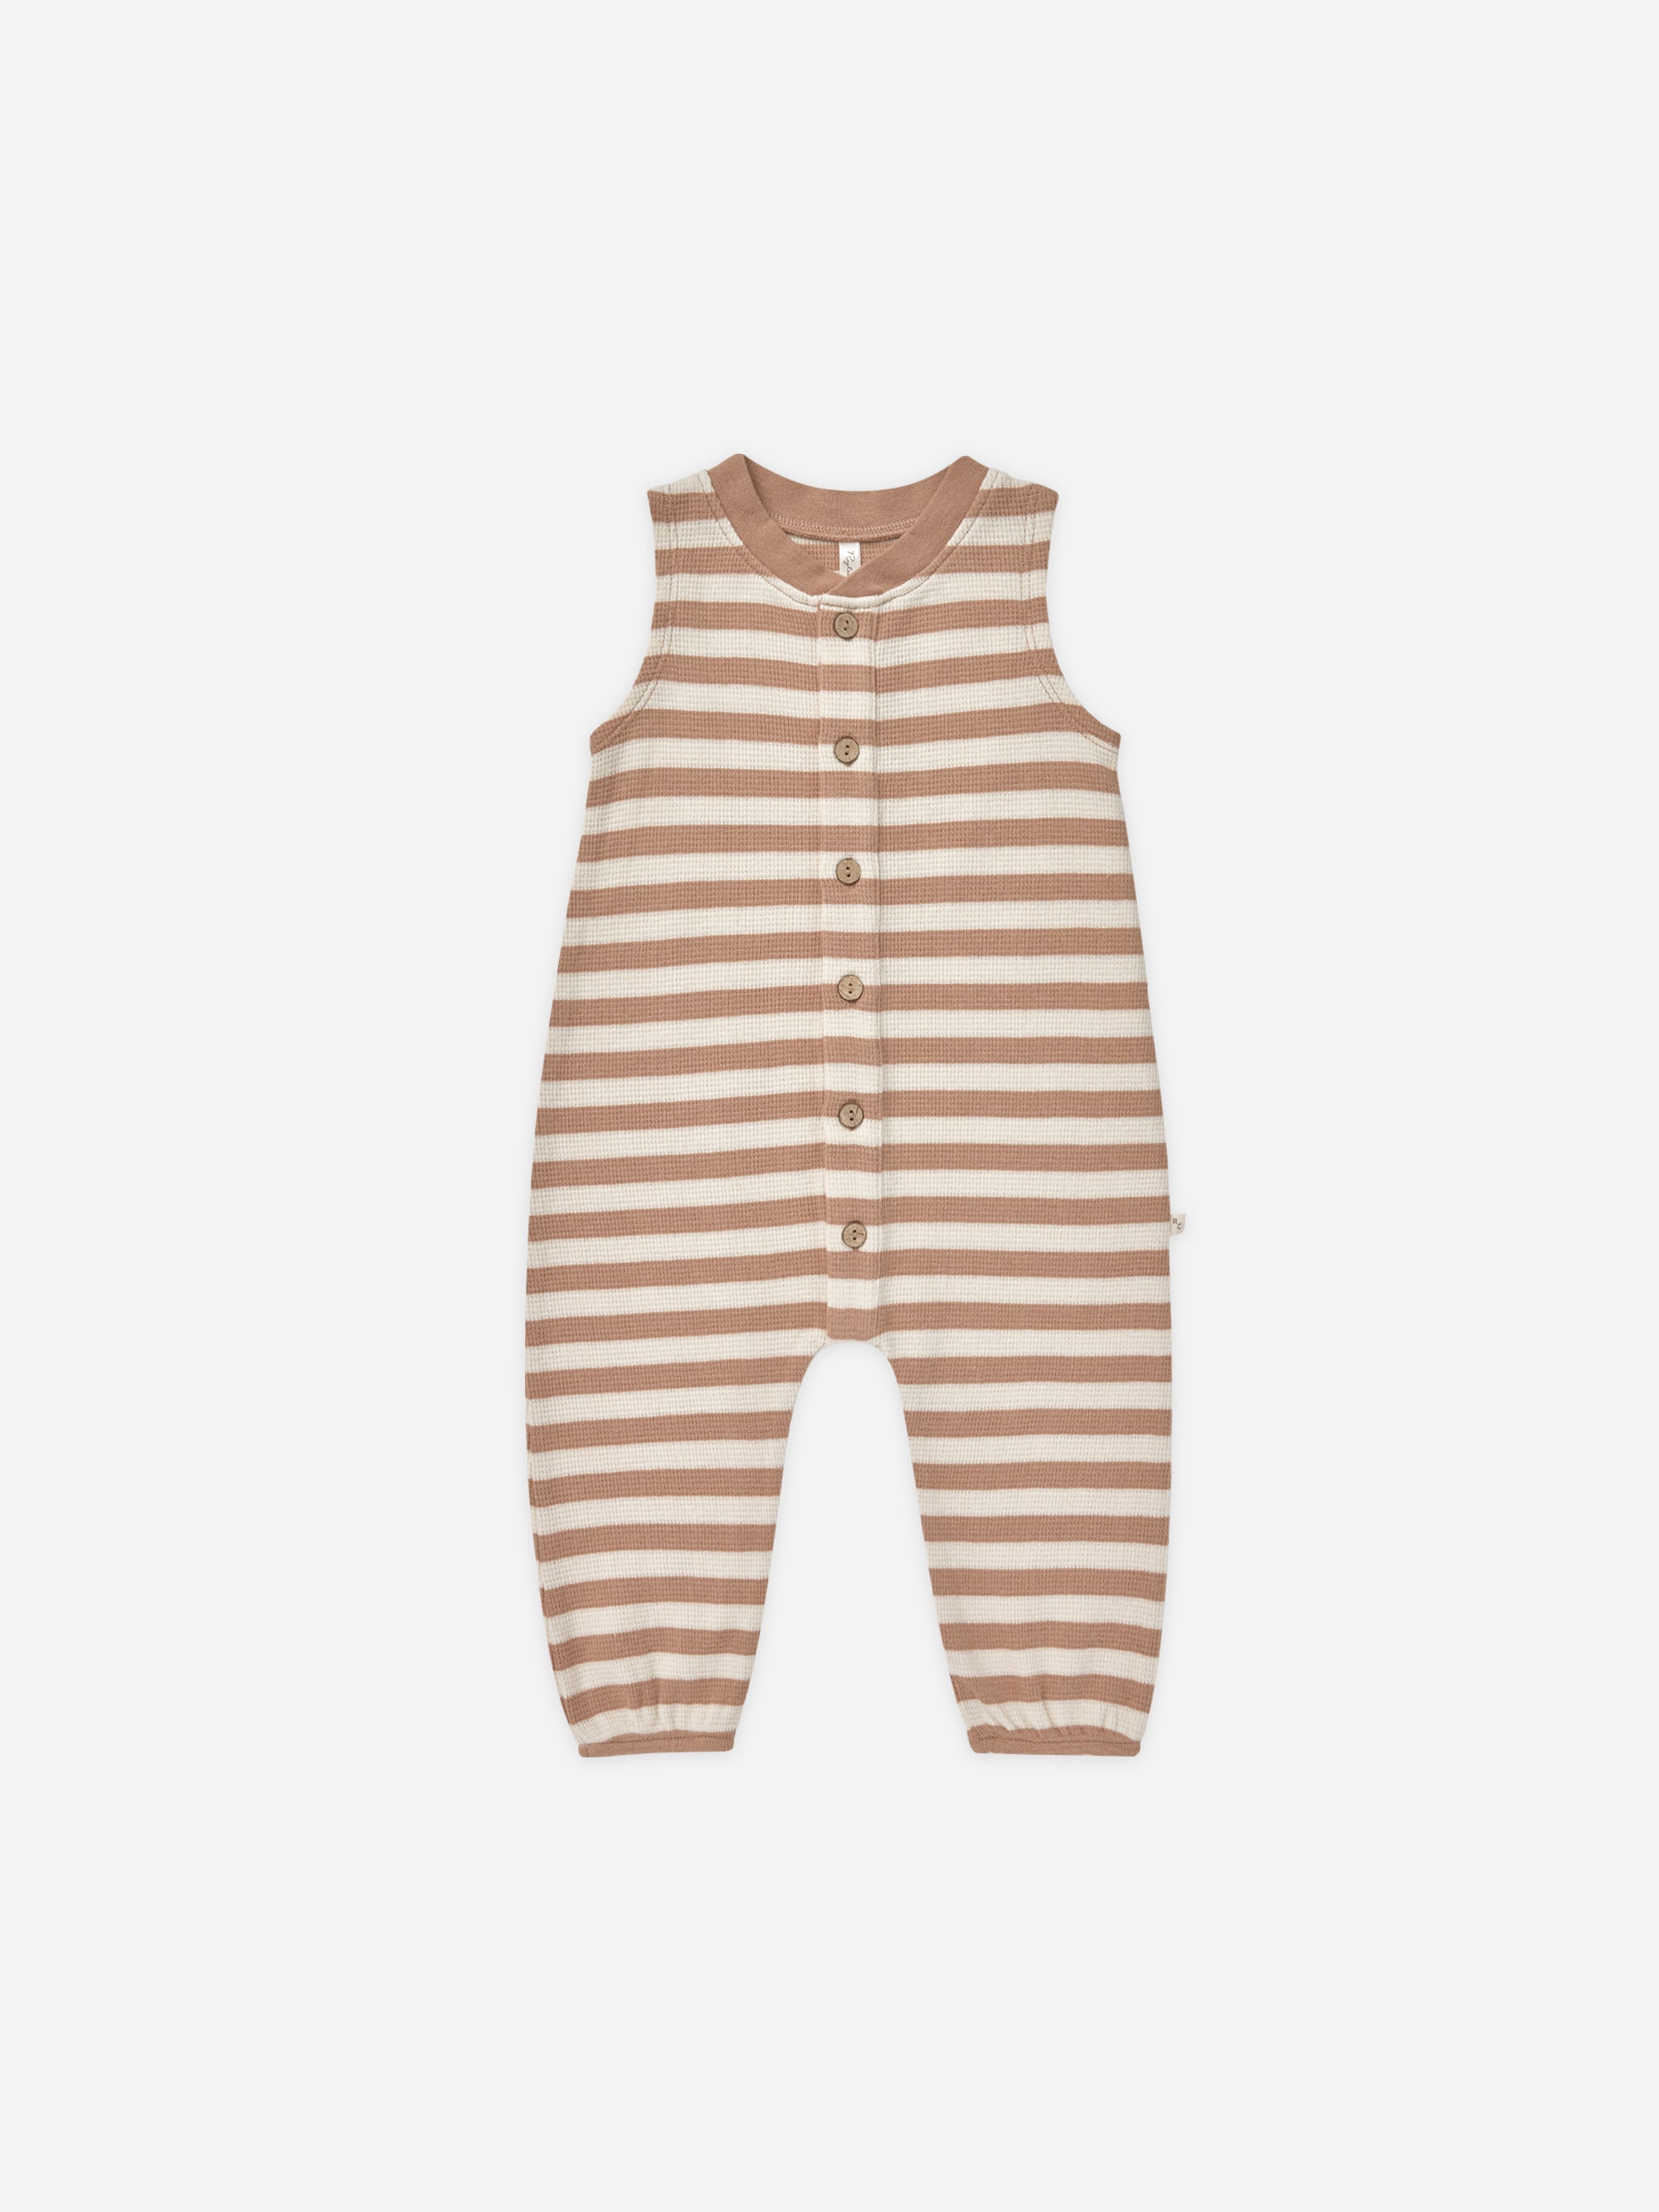 Summer Waffle Jumpsuit || Clay Stripe - Rylee + Cru | Kids Clothes | Trendy Baby Clothes | Modern Infant Outfits |